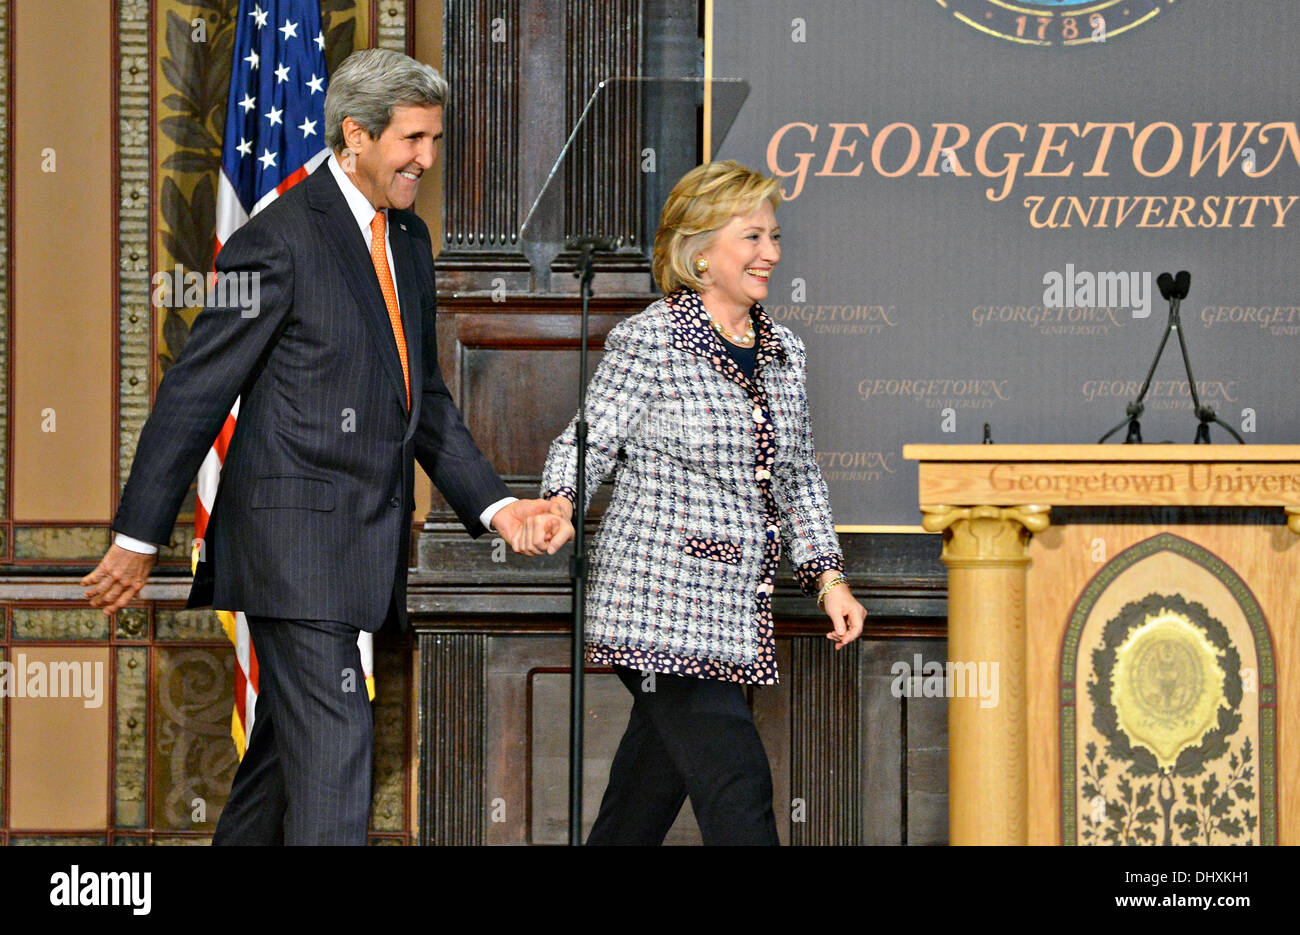 US Secretary of State John Kerry holds hands with Former Secretary of State Hillary Clinton as they walk on stage together at the Georgetown University Symposium Advancing Afghan Women: Promoting Peace and Progress in Afghanistan at Georgetown University November 15, 2013 in Washington, DC. Stock Photo